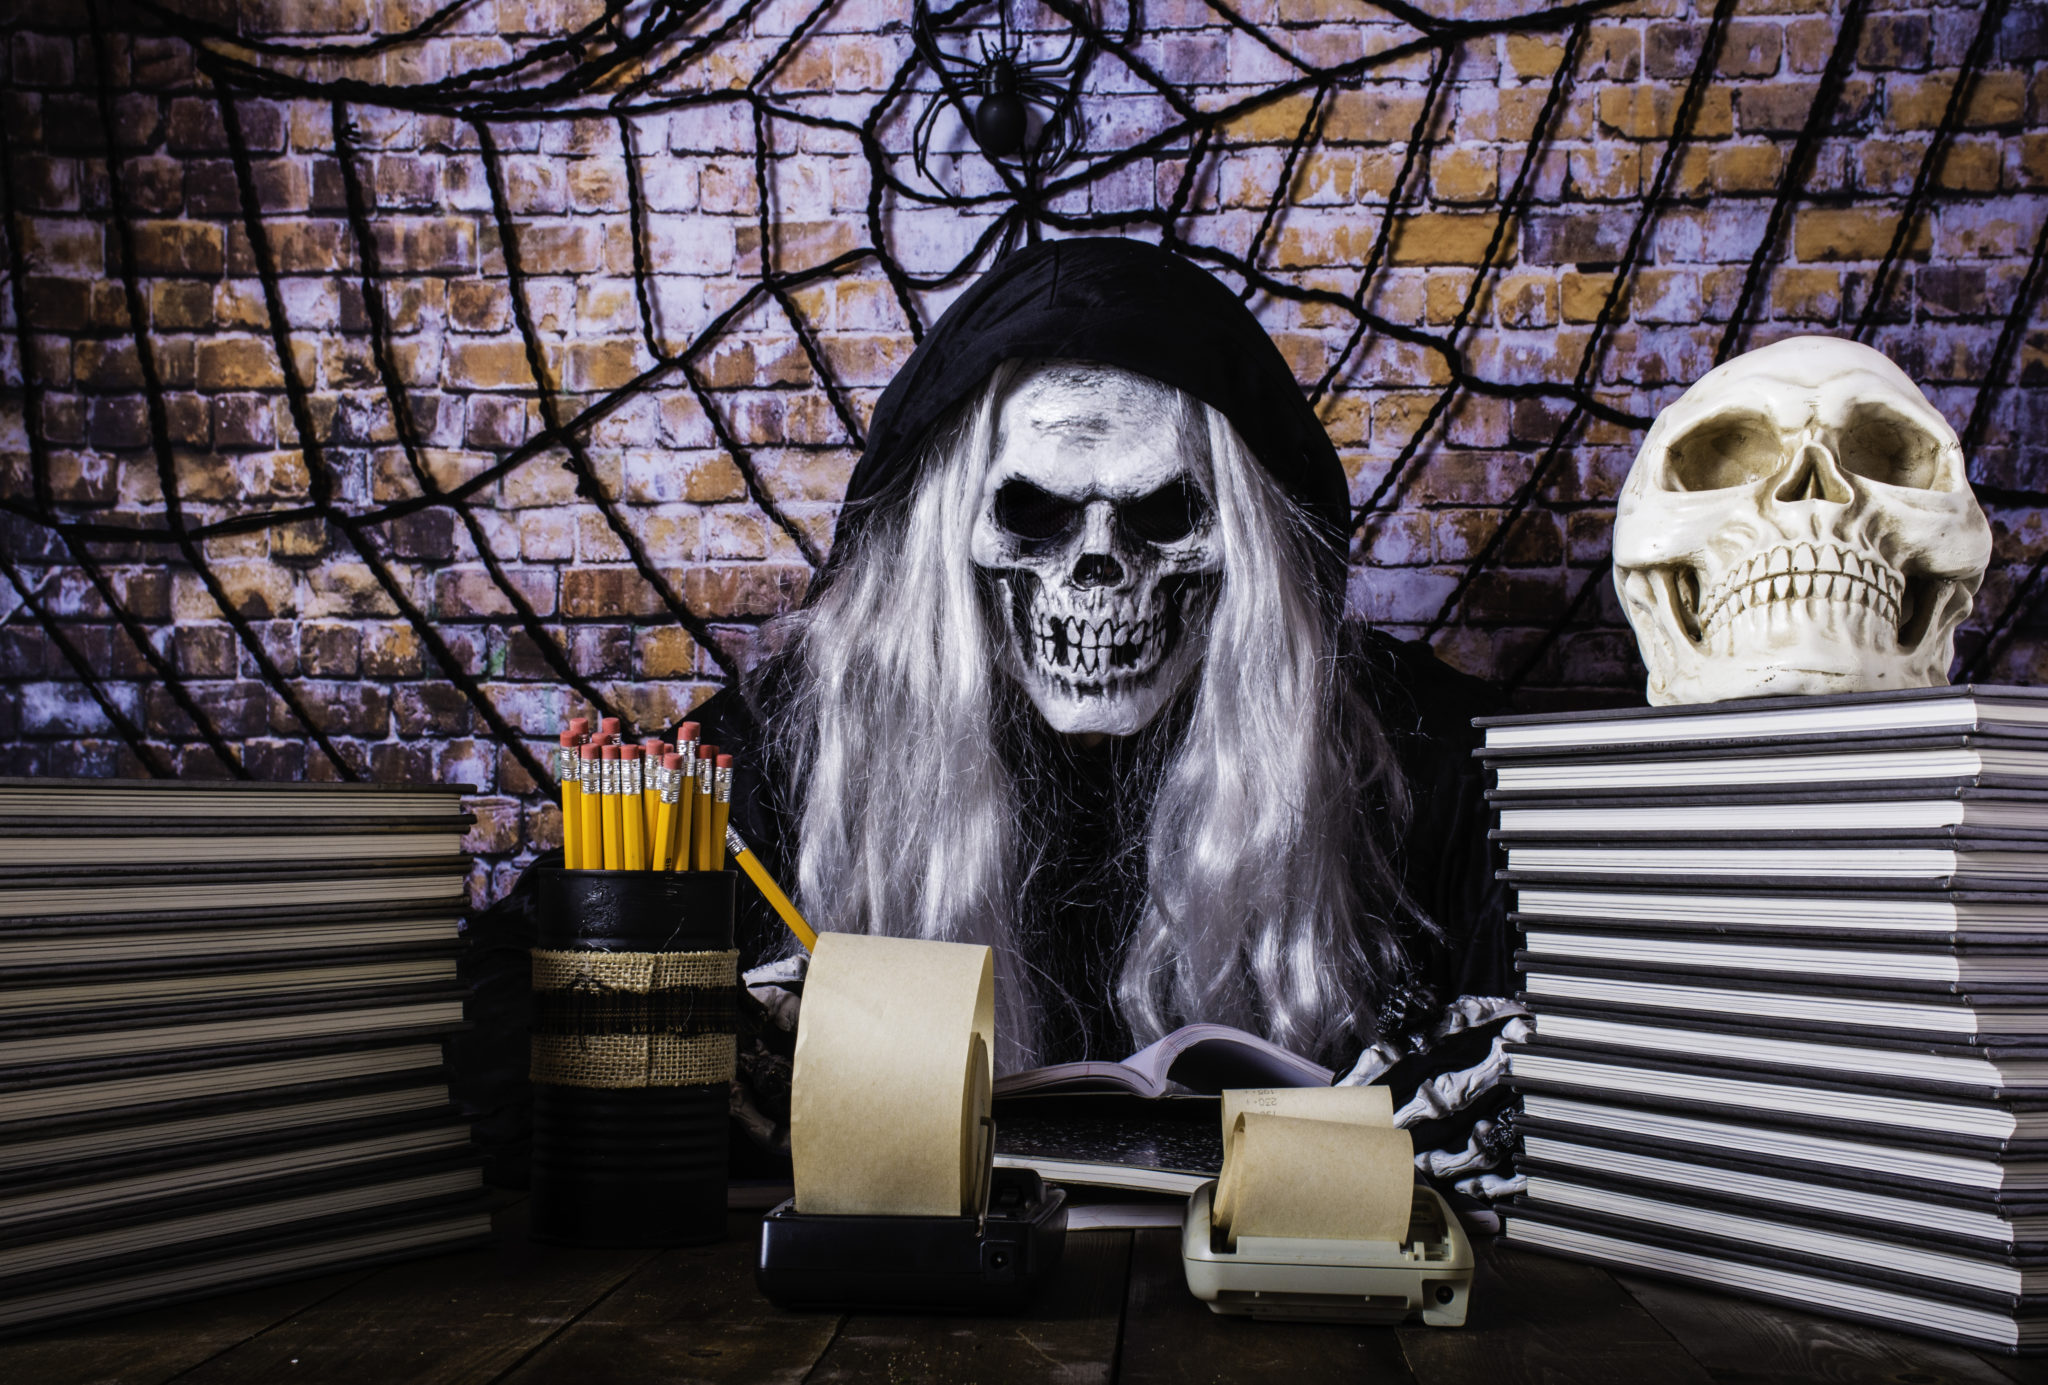 man in Grimm reaper robe scary skull mask long grey hair and skeleton hands counting lost souls with adding machine and pencils with brick wall background covered with large spider and web Image